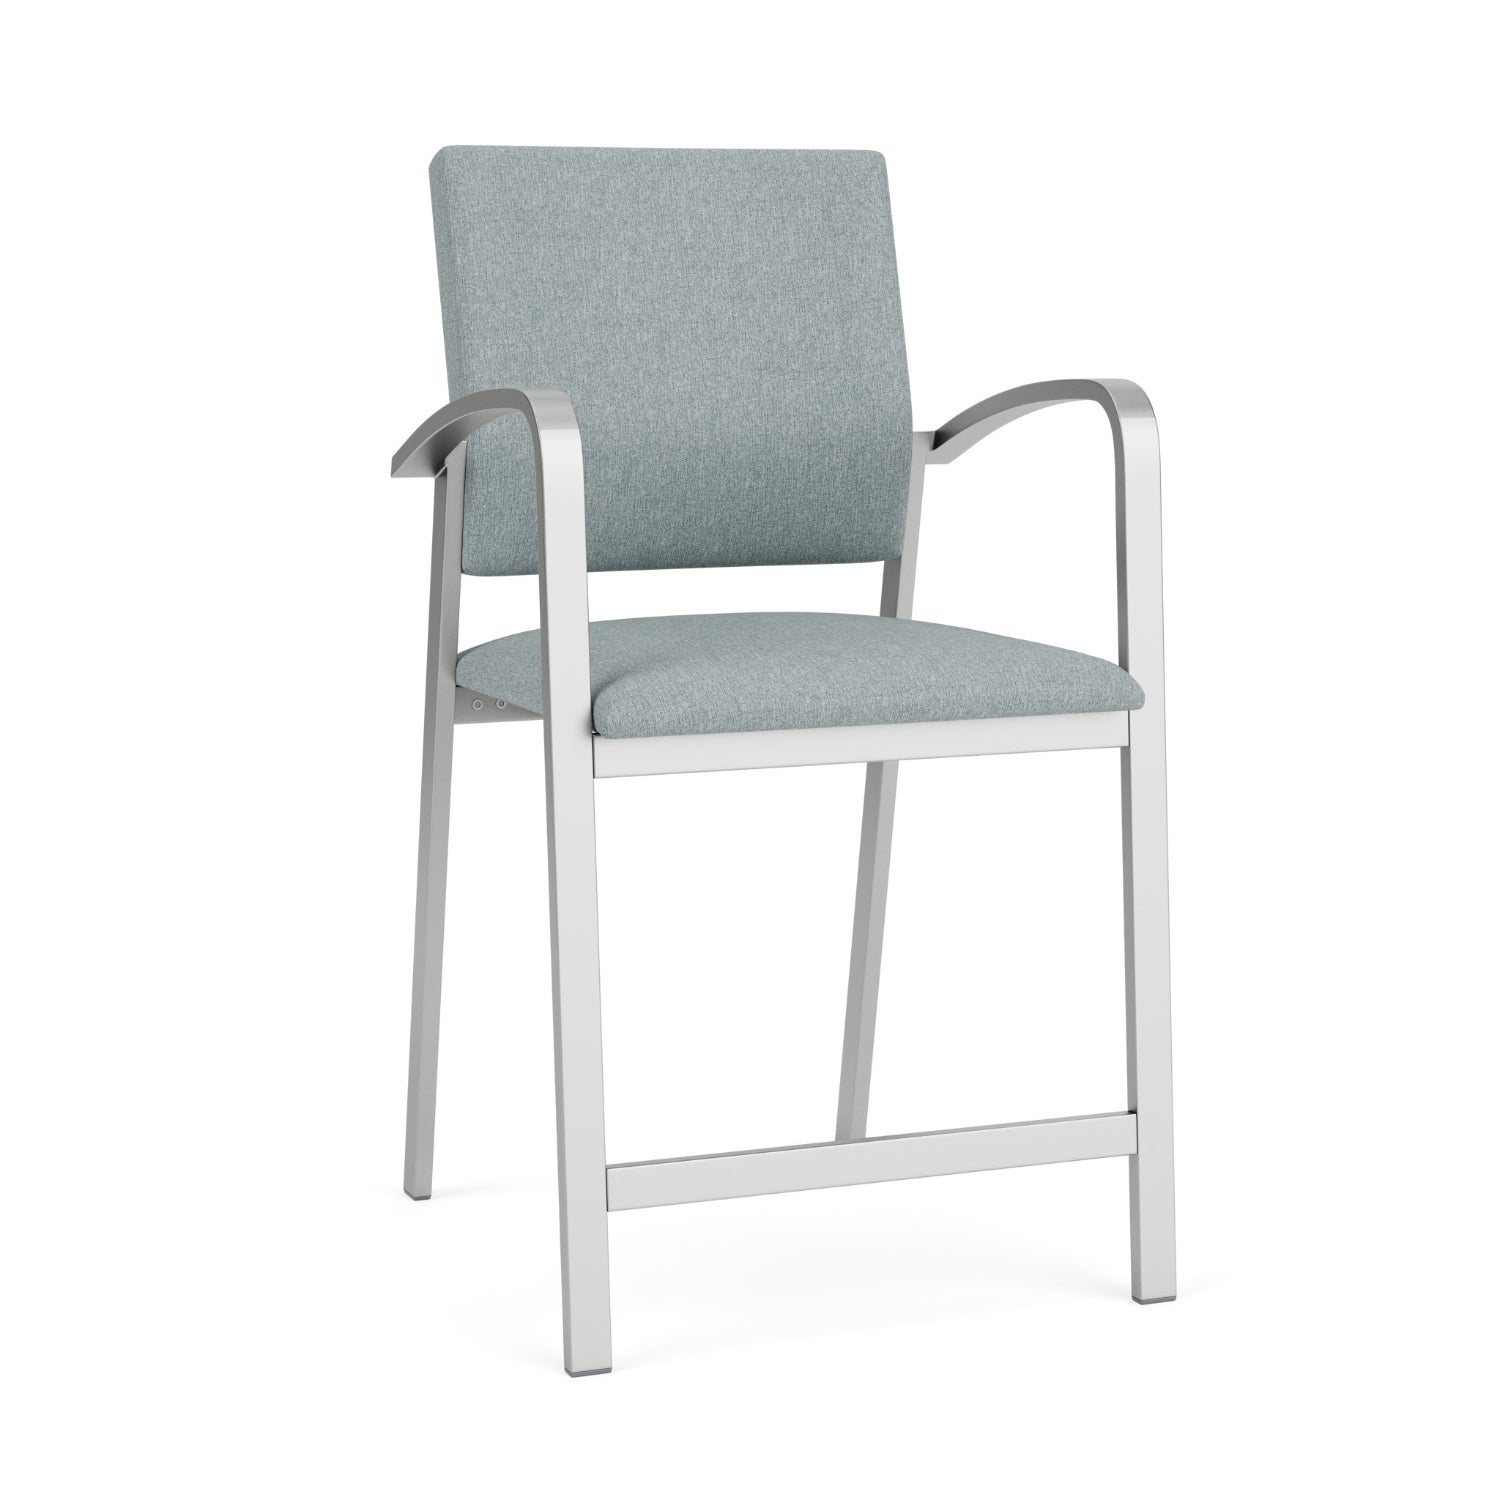 Newport Collection Reception Seating, Hip Chair, 300 lb. Capacity, Healthcare Vinyl Upholstery, FREE SHIPPING